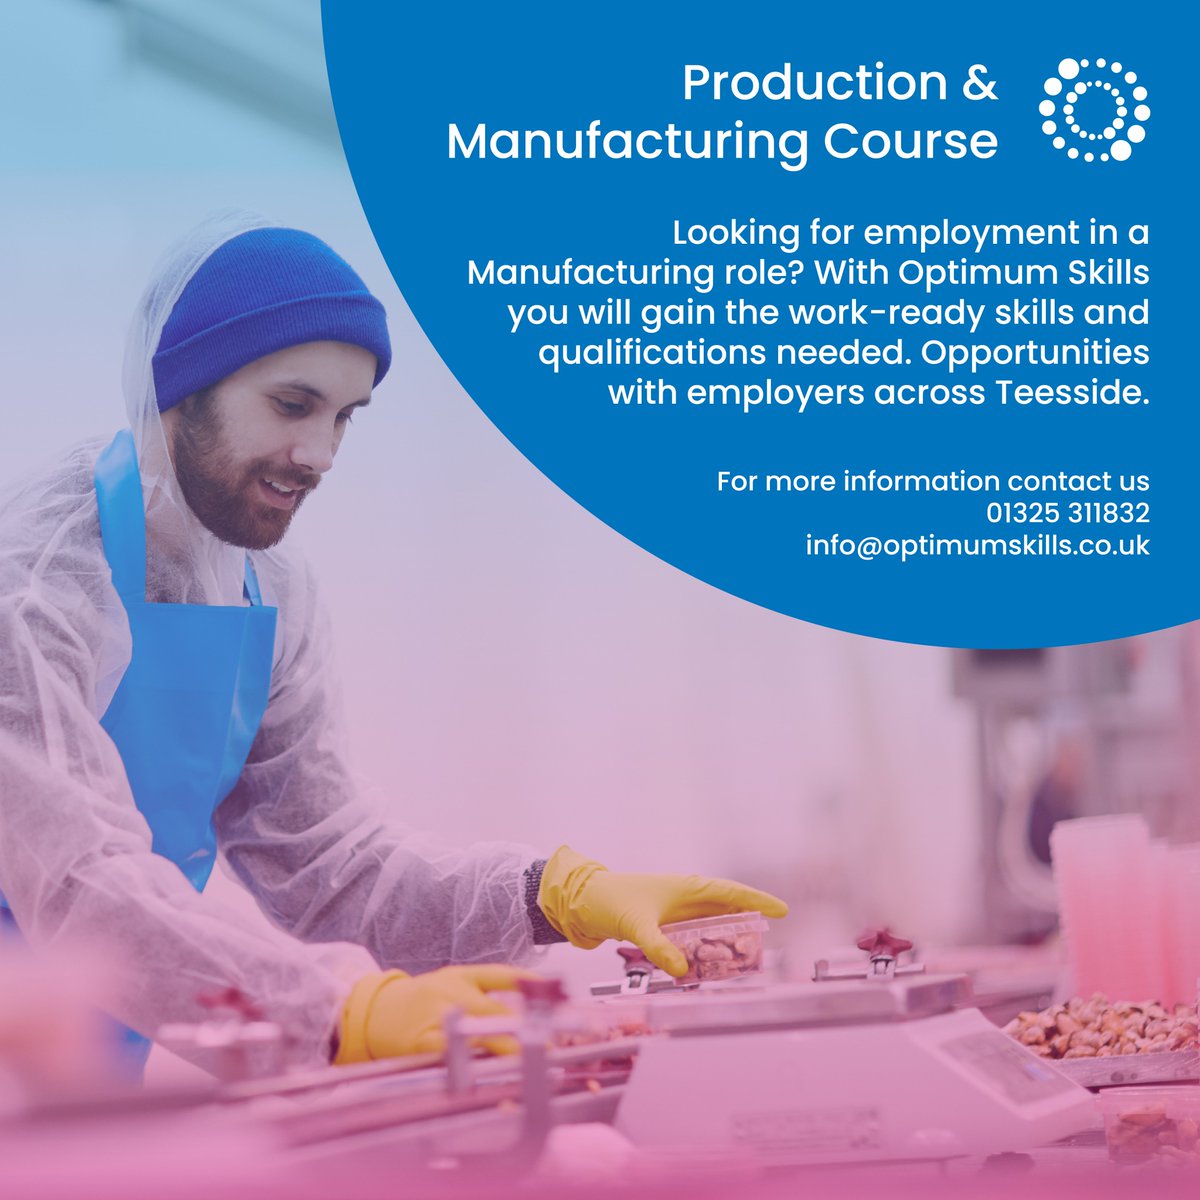 Do you need support back into employment? At the Optimum Skills Middlesbrough Academy, we can provide you with fully-funded training to boost your skills and grow your potential!

For more information contact the team. 

#OptimisingPotential #Manufacturing #Middlesbrough https://t.co/gwdzx3vXwy